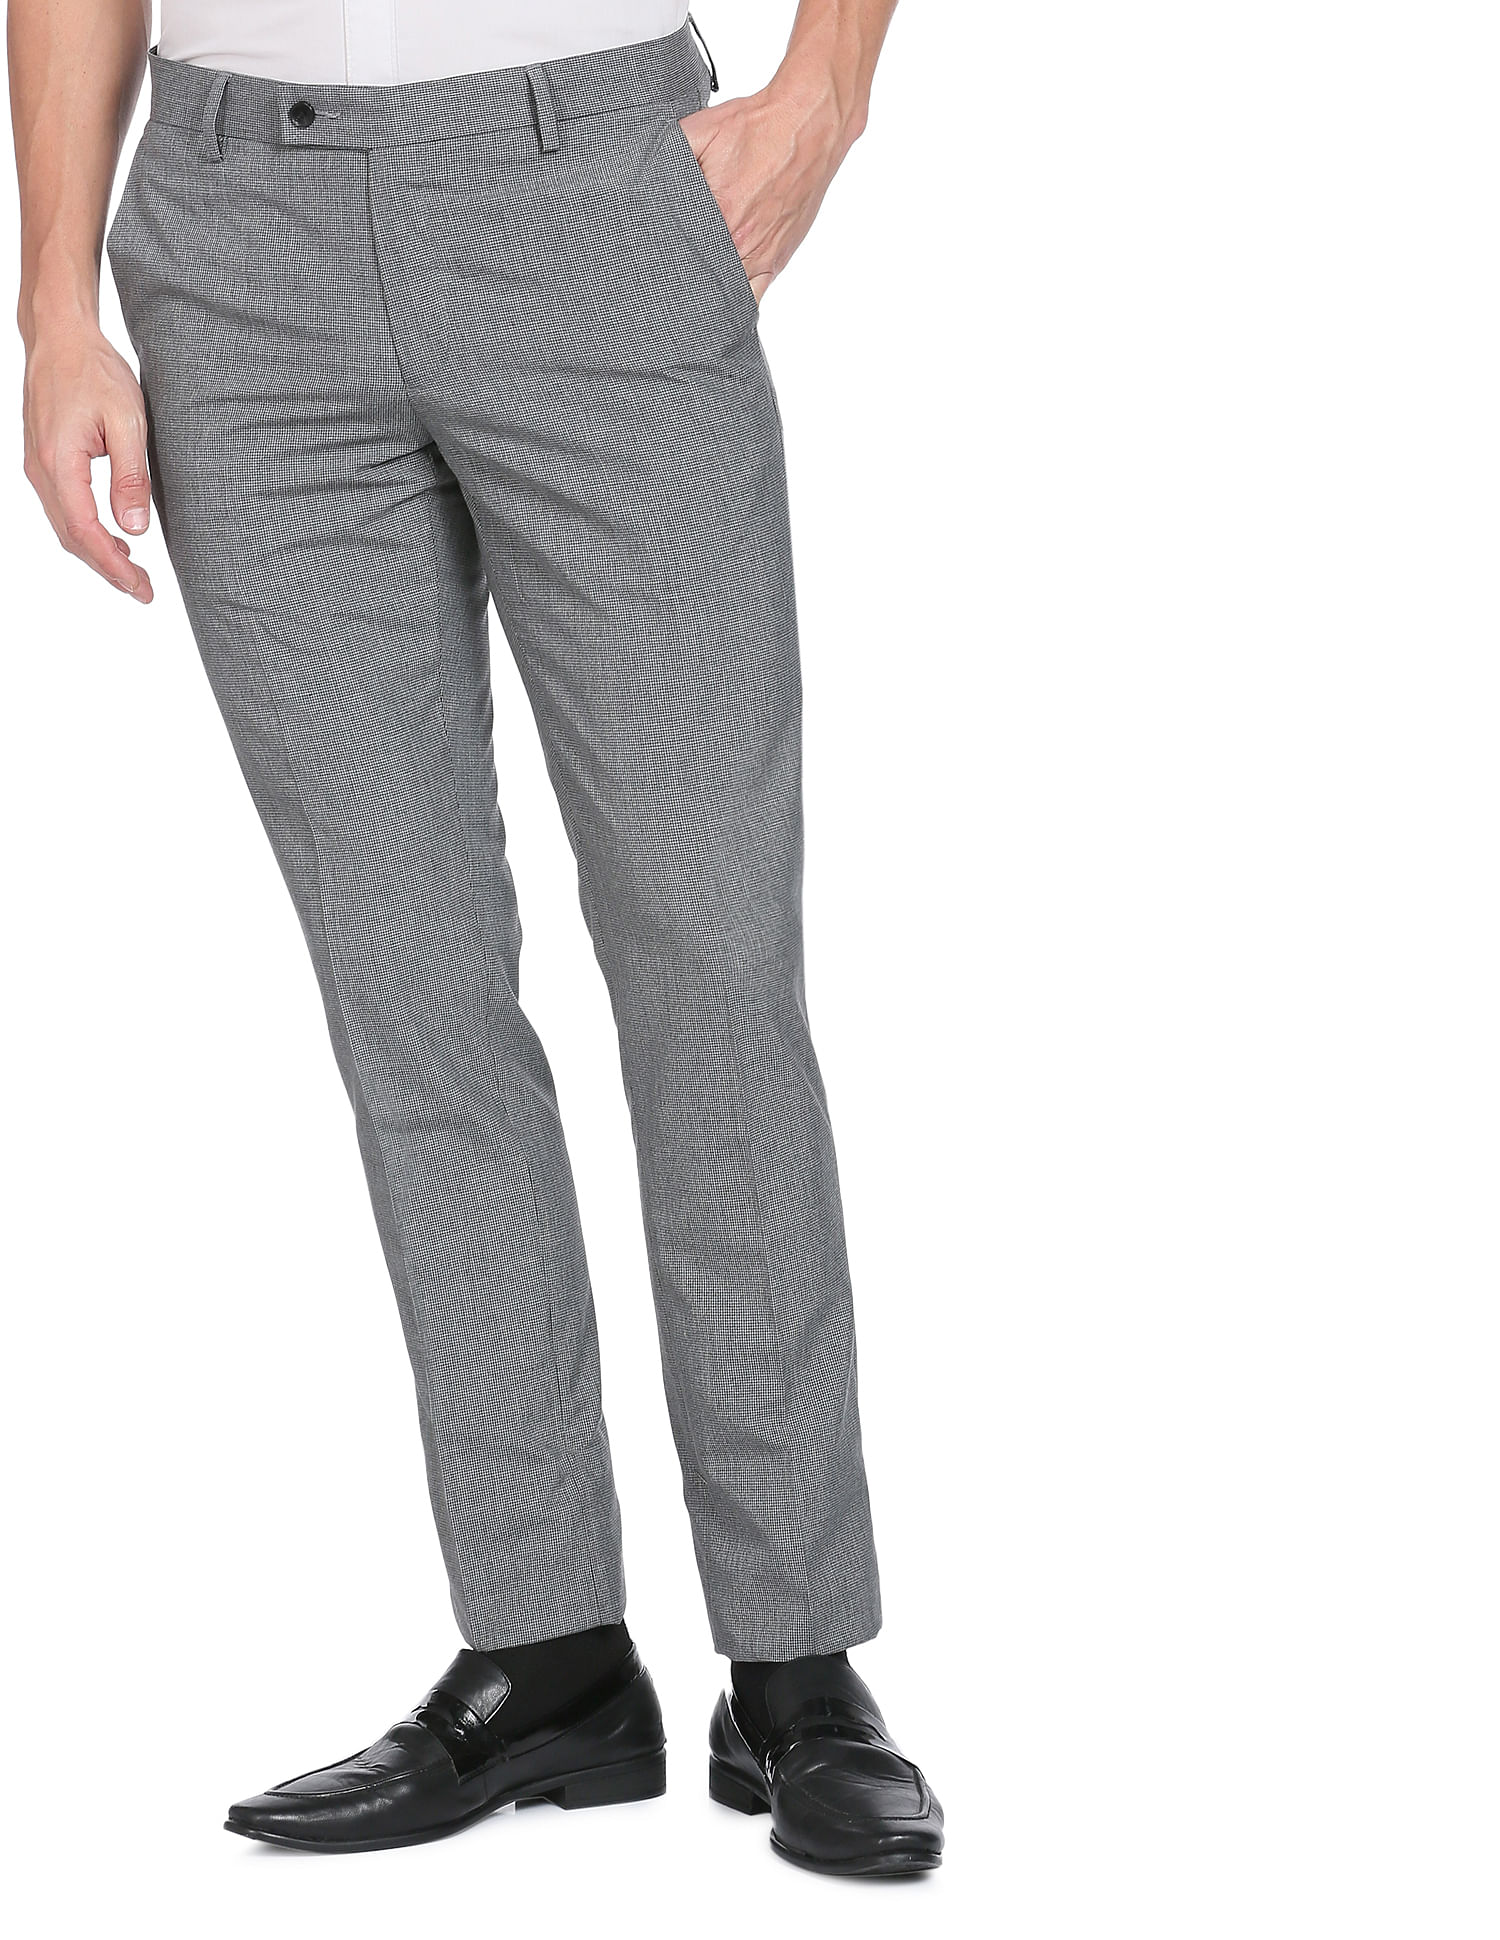 Buy Arrow Tailored Regular Fit Checked Formal Trousers online